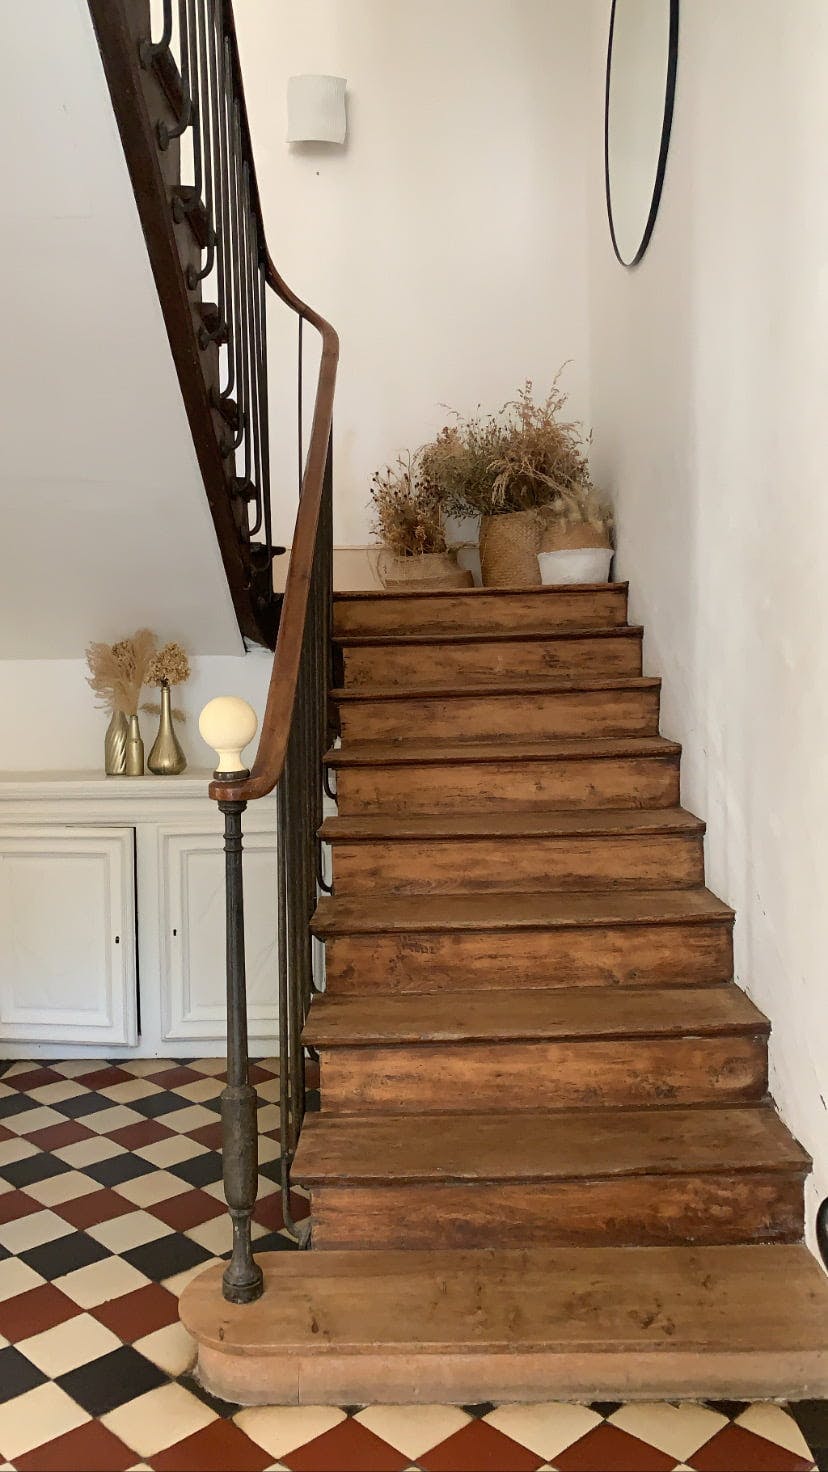 wooden stairs to the first floor of the house